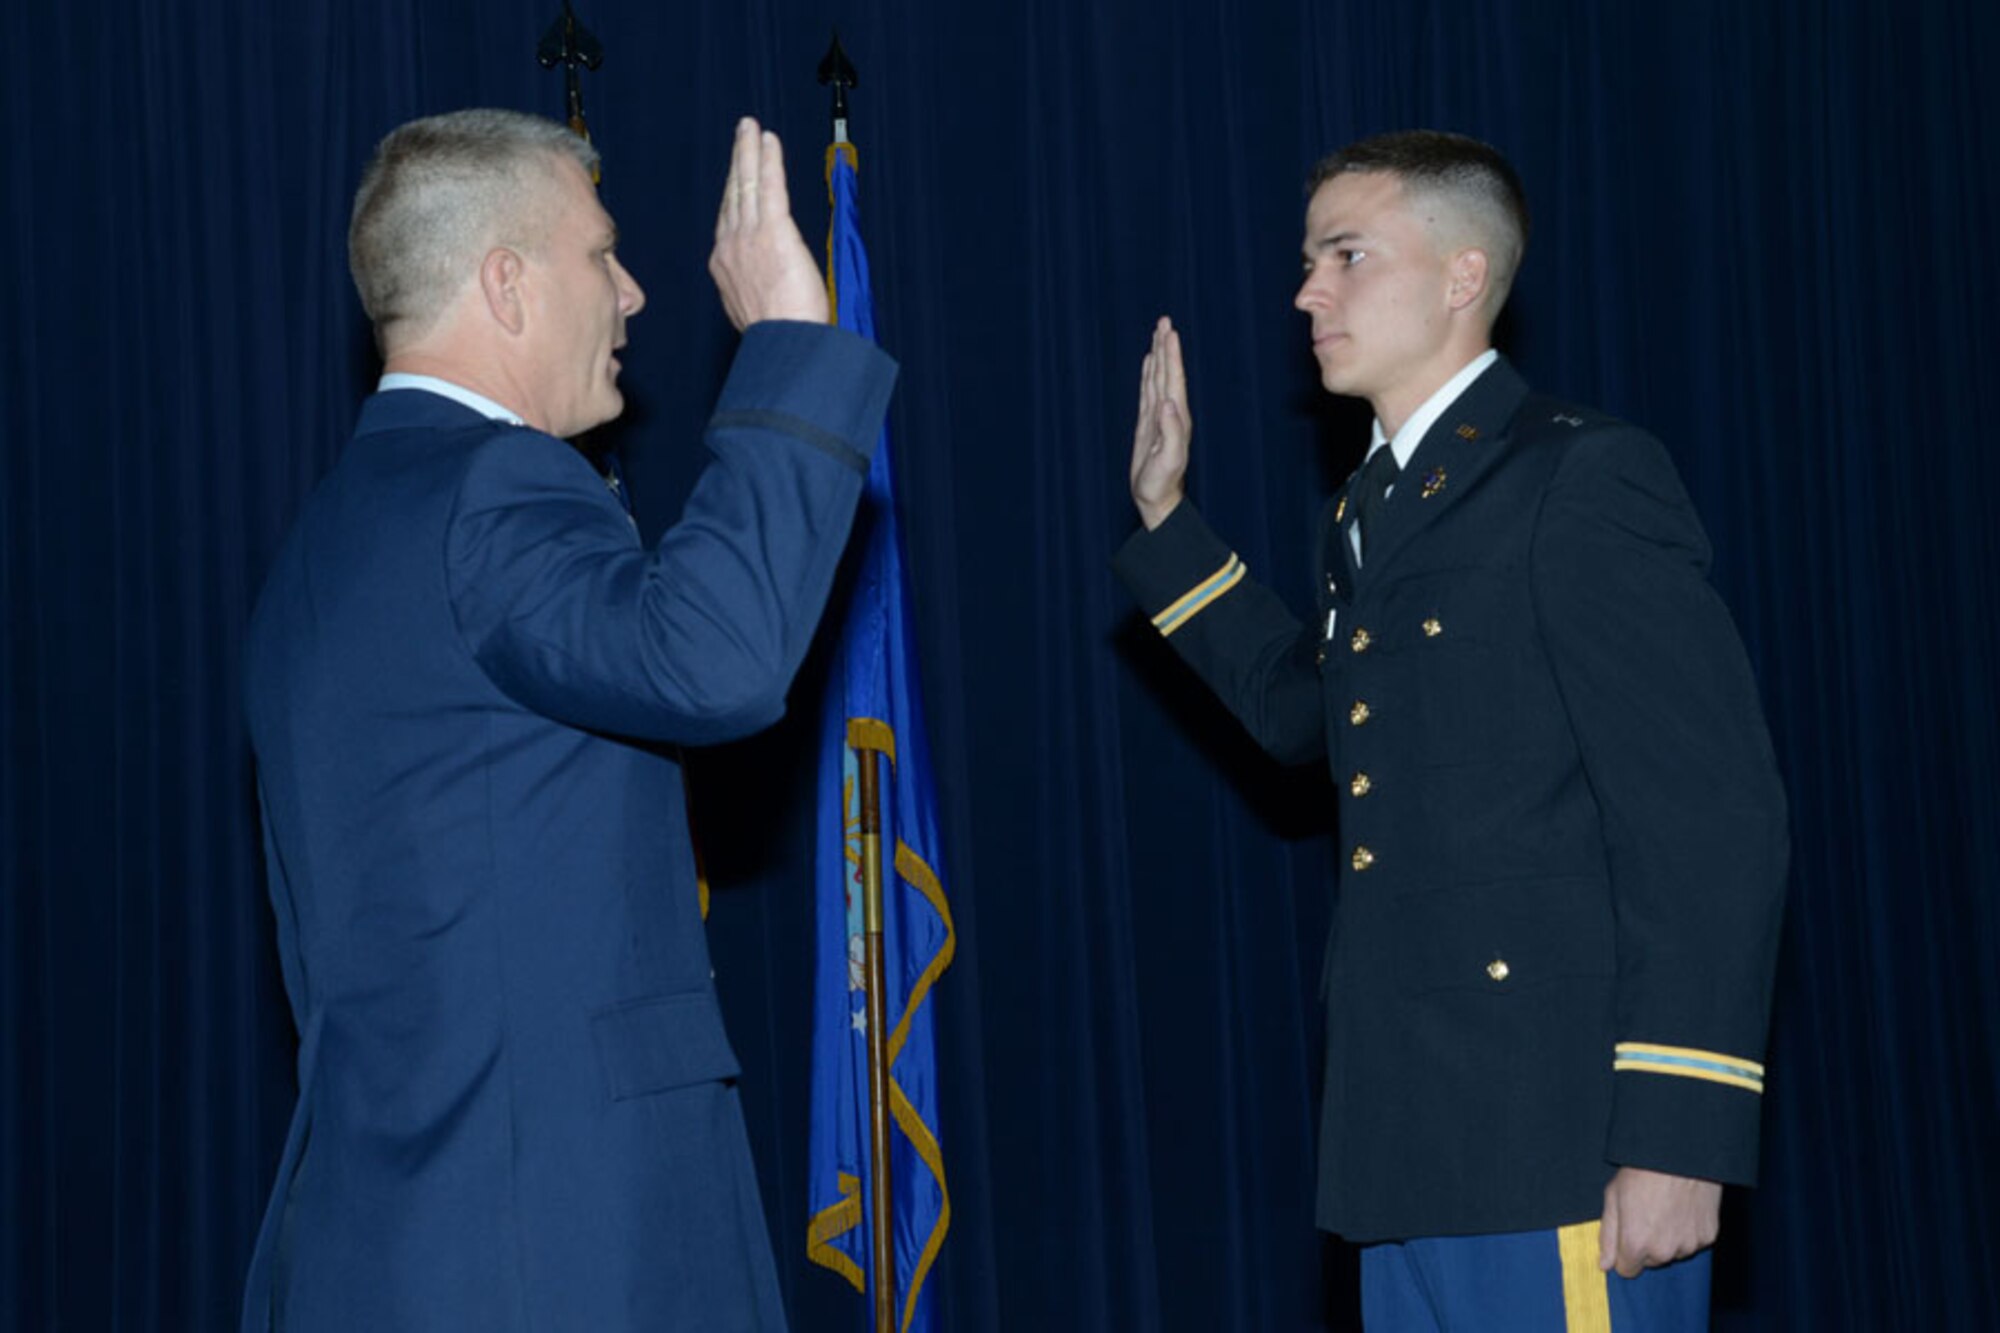 Col. Kyle 'Cowboy' Ingham administers the oath of office to 2nd
Lt. Austin Ingham during ceremonies celebrating the colonel's retirement and
his son's commissioning on May 20 at Joint Base-Randolph, Texas. (Air Force photo by Joel Martinez)
